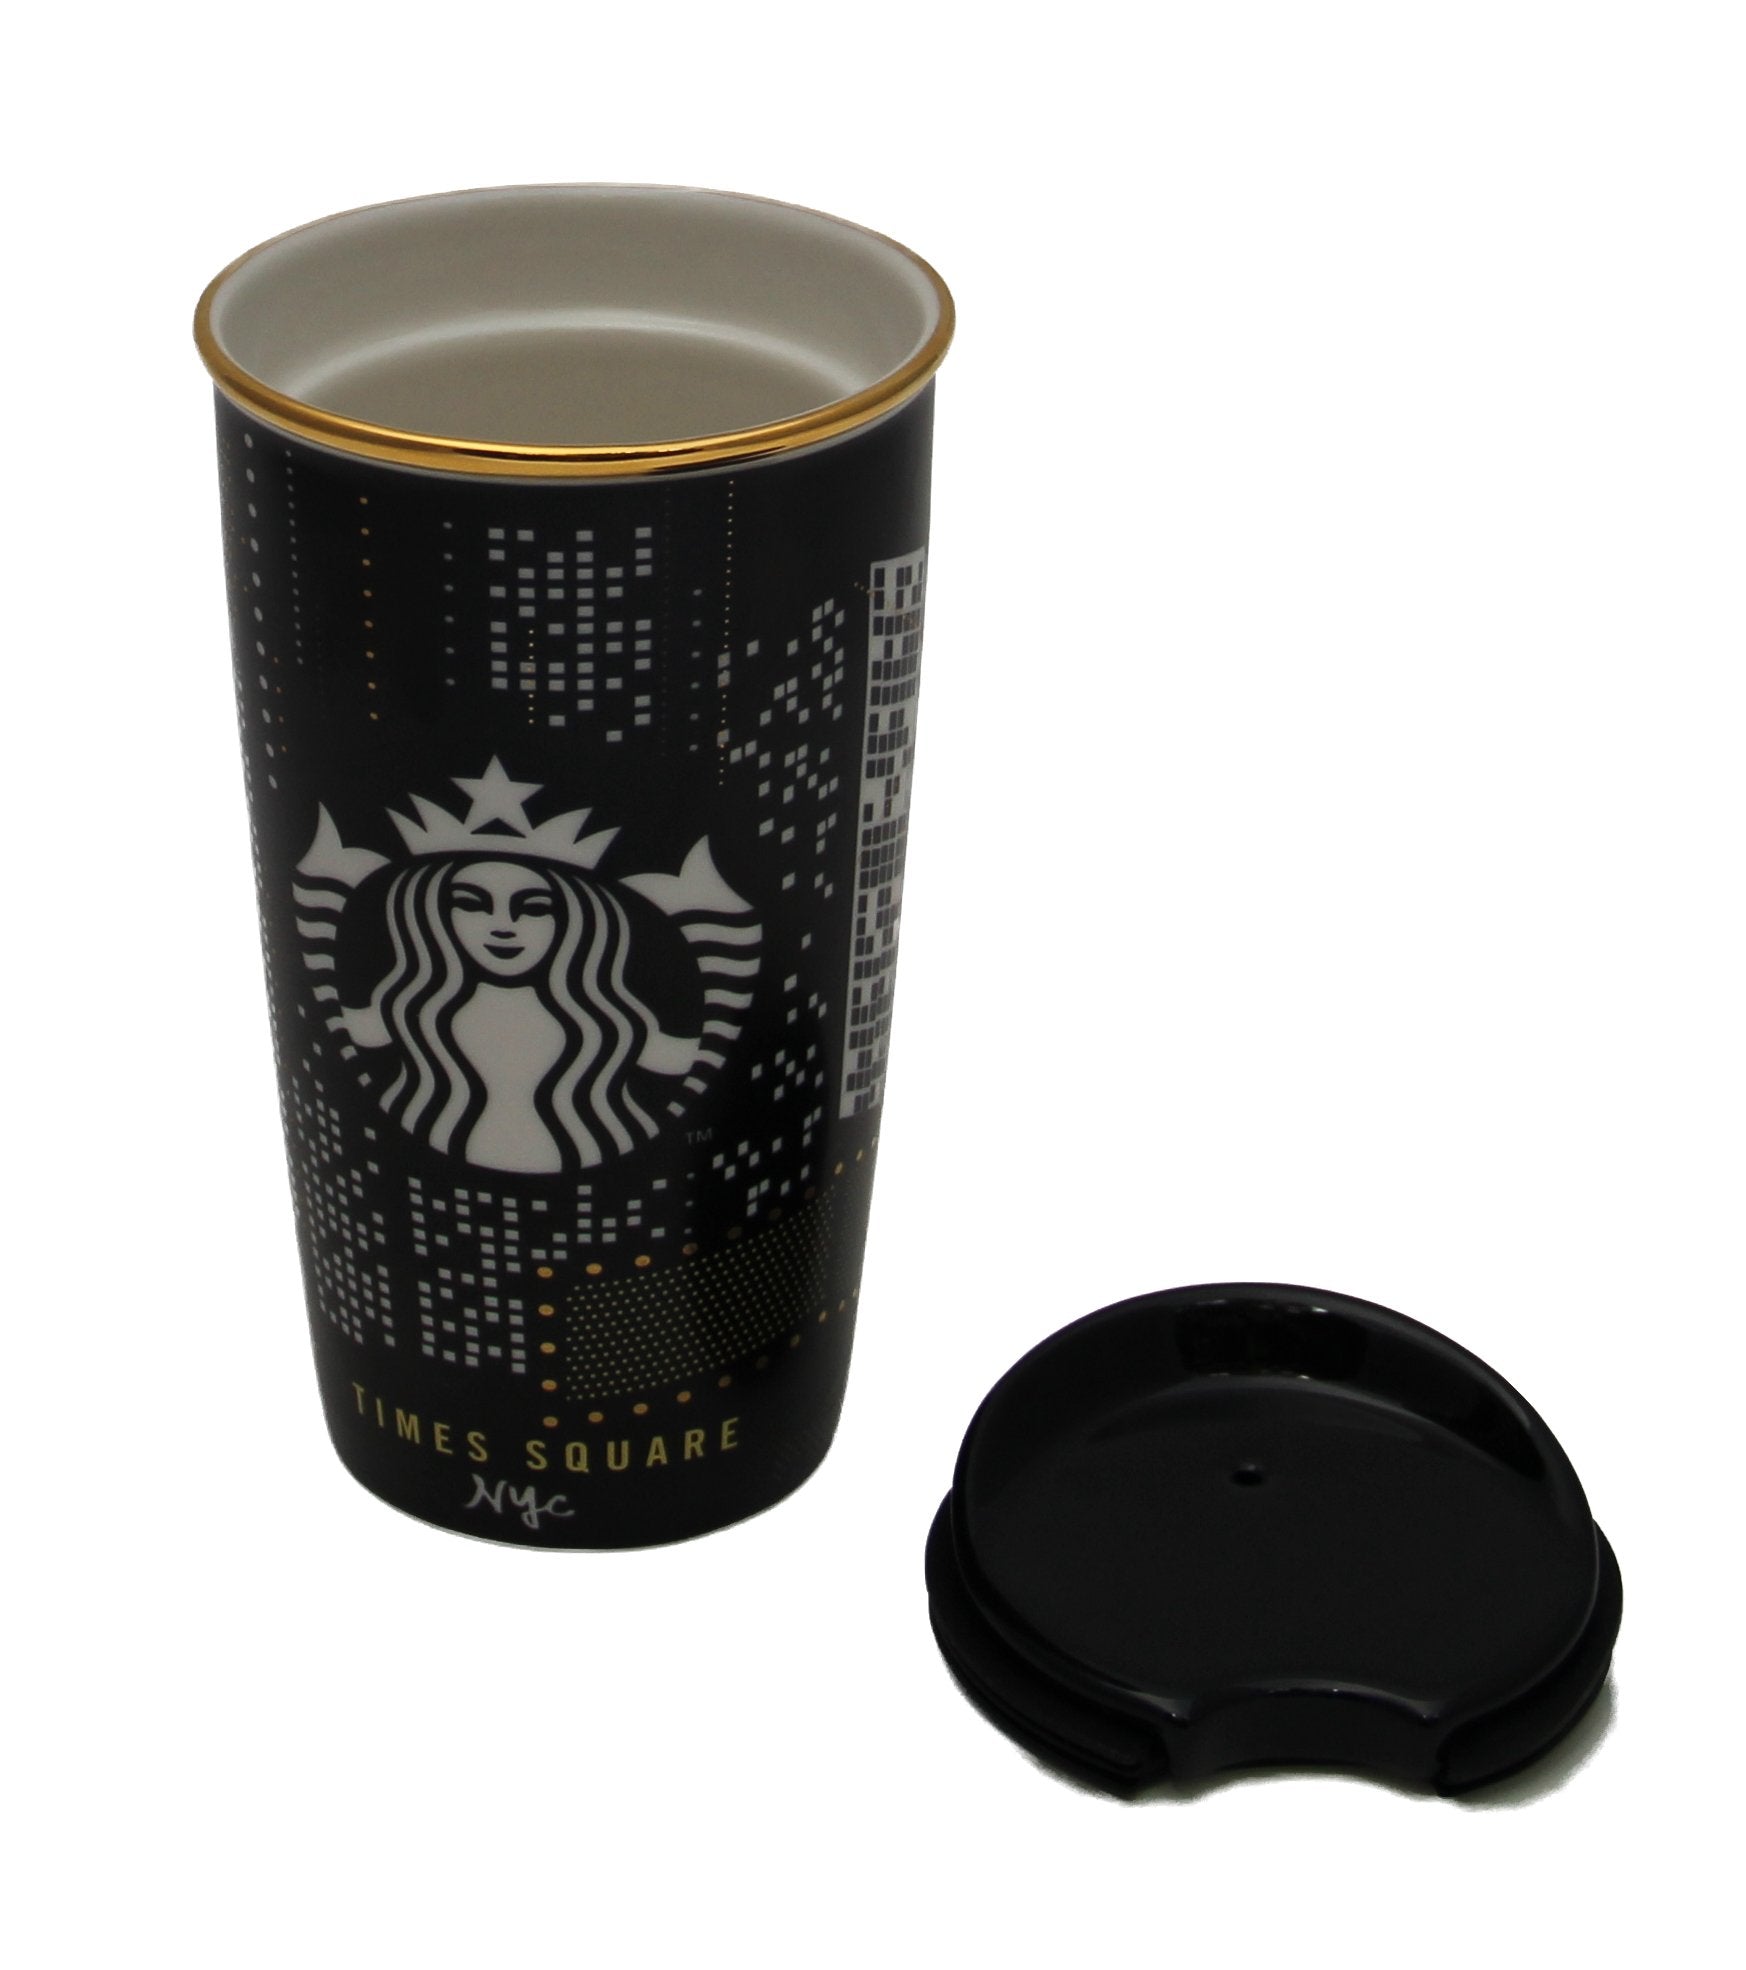 Starbucks Times Square NYC Collection, Ceramic Double-Wall Traveler 12 Oz